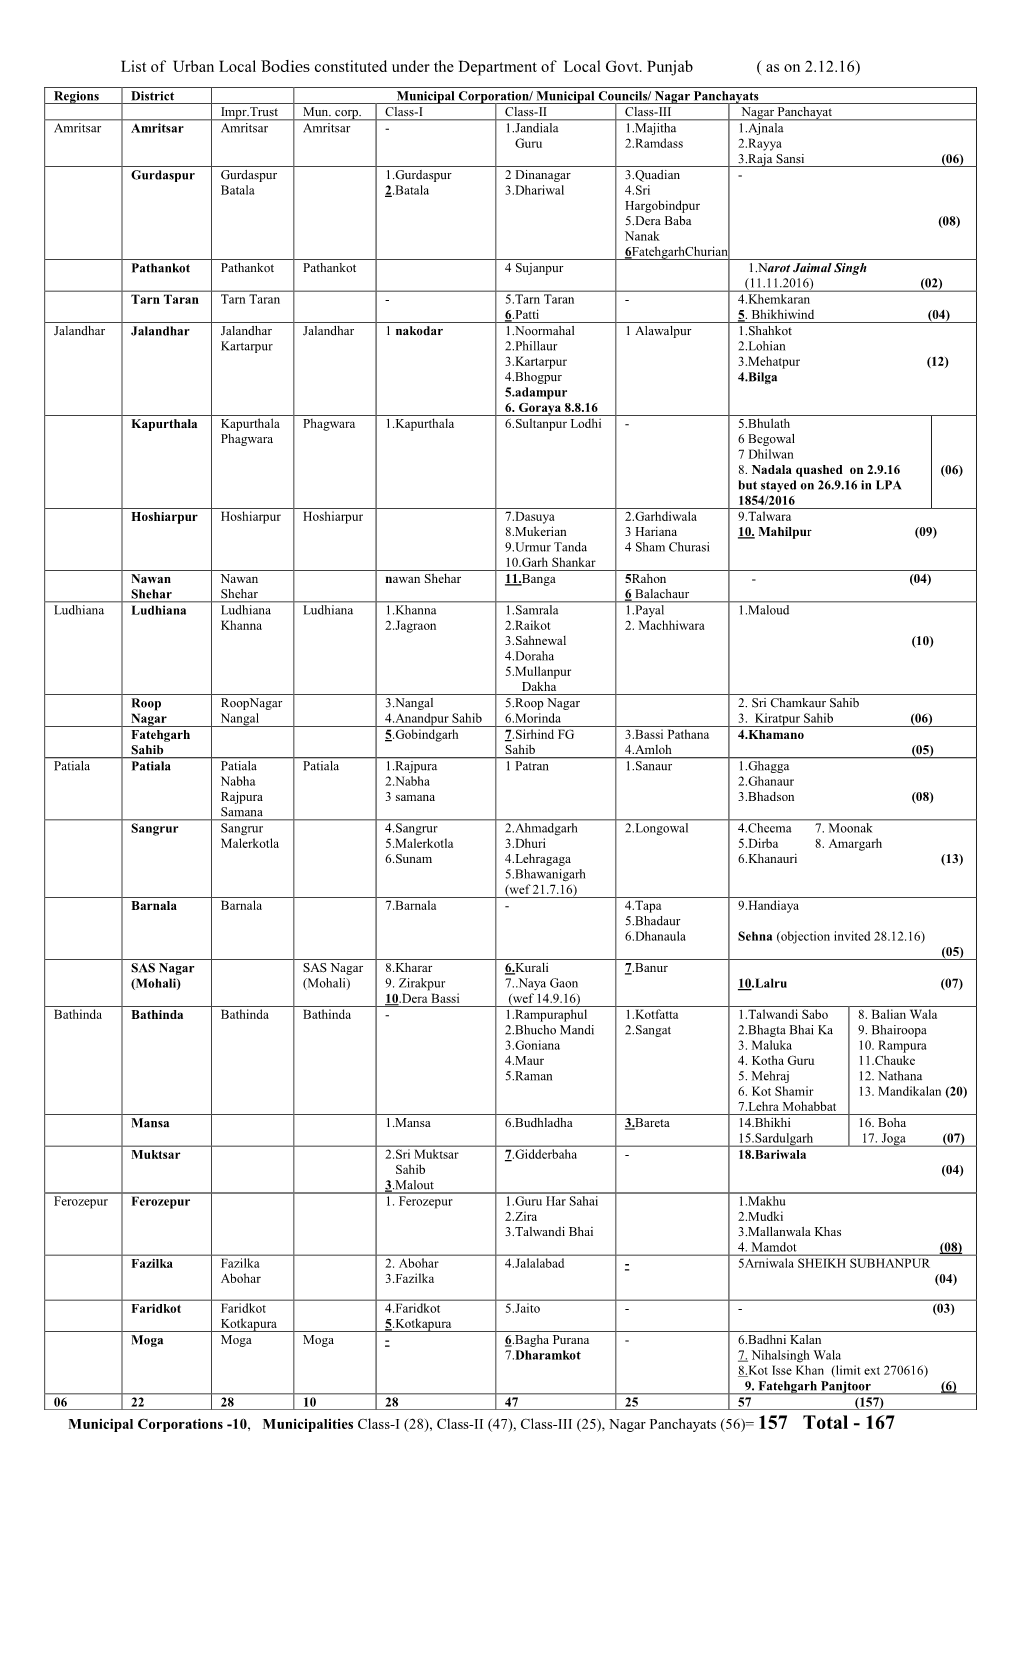 List of Urban Local Bodies Constituted Under the Department of Local Govt